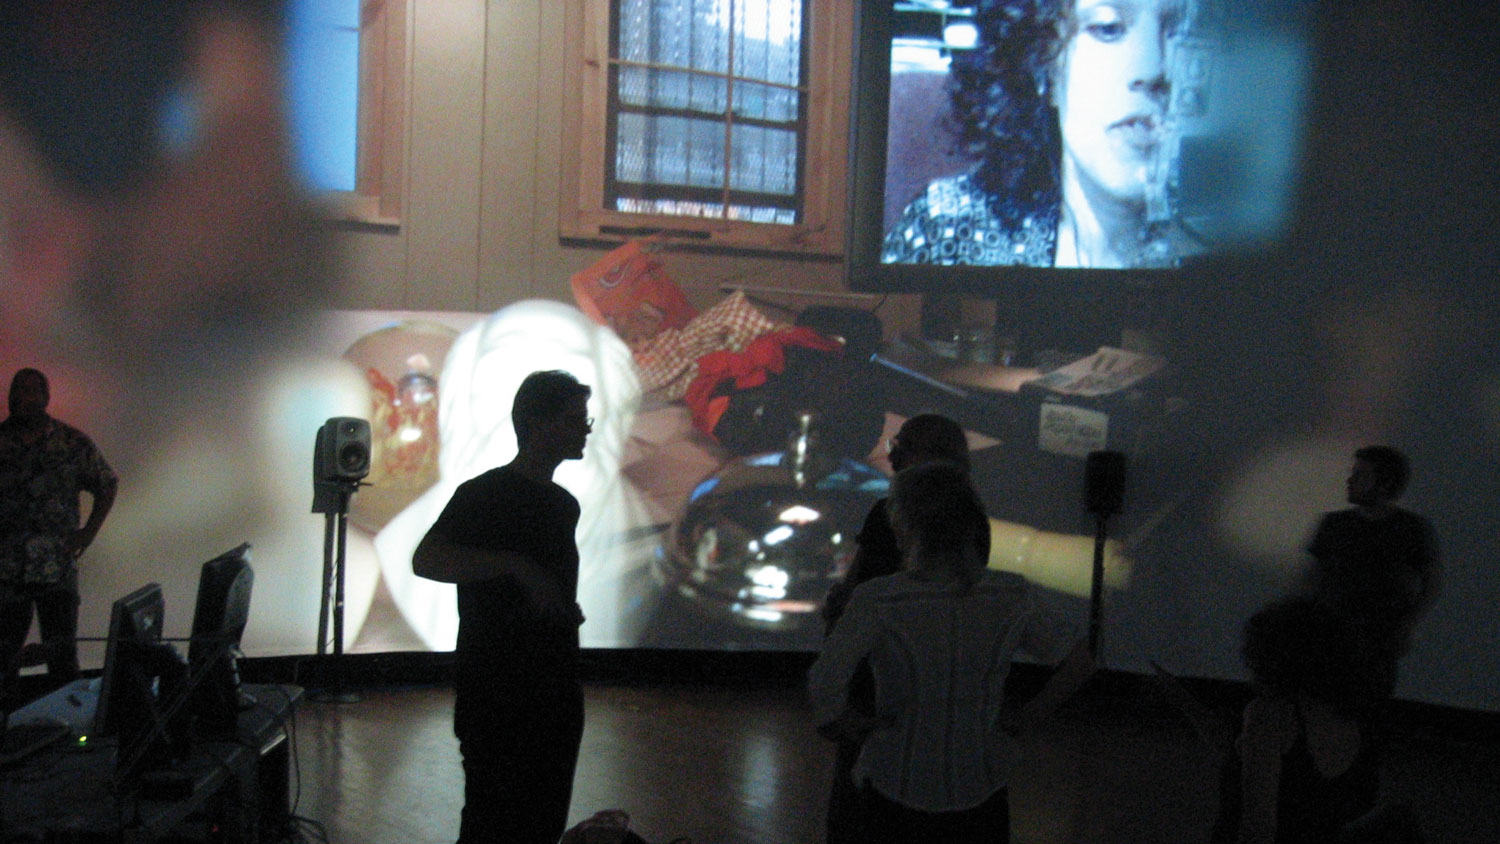 Three people chatting intently silhouetted against a large projection of a cluttered room. 